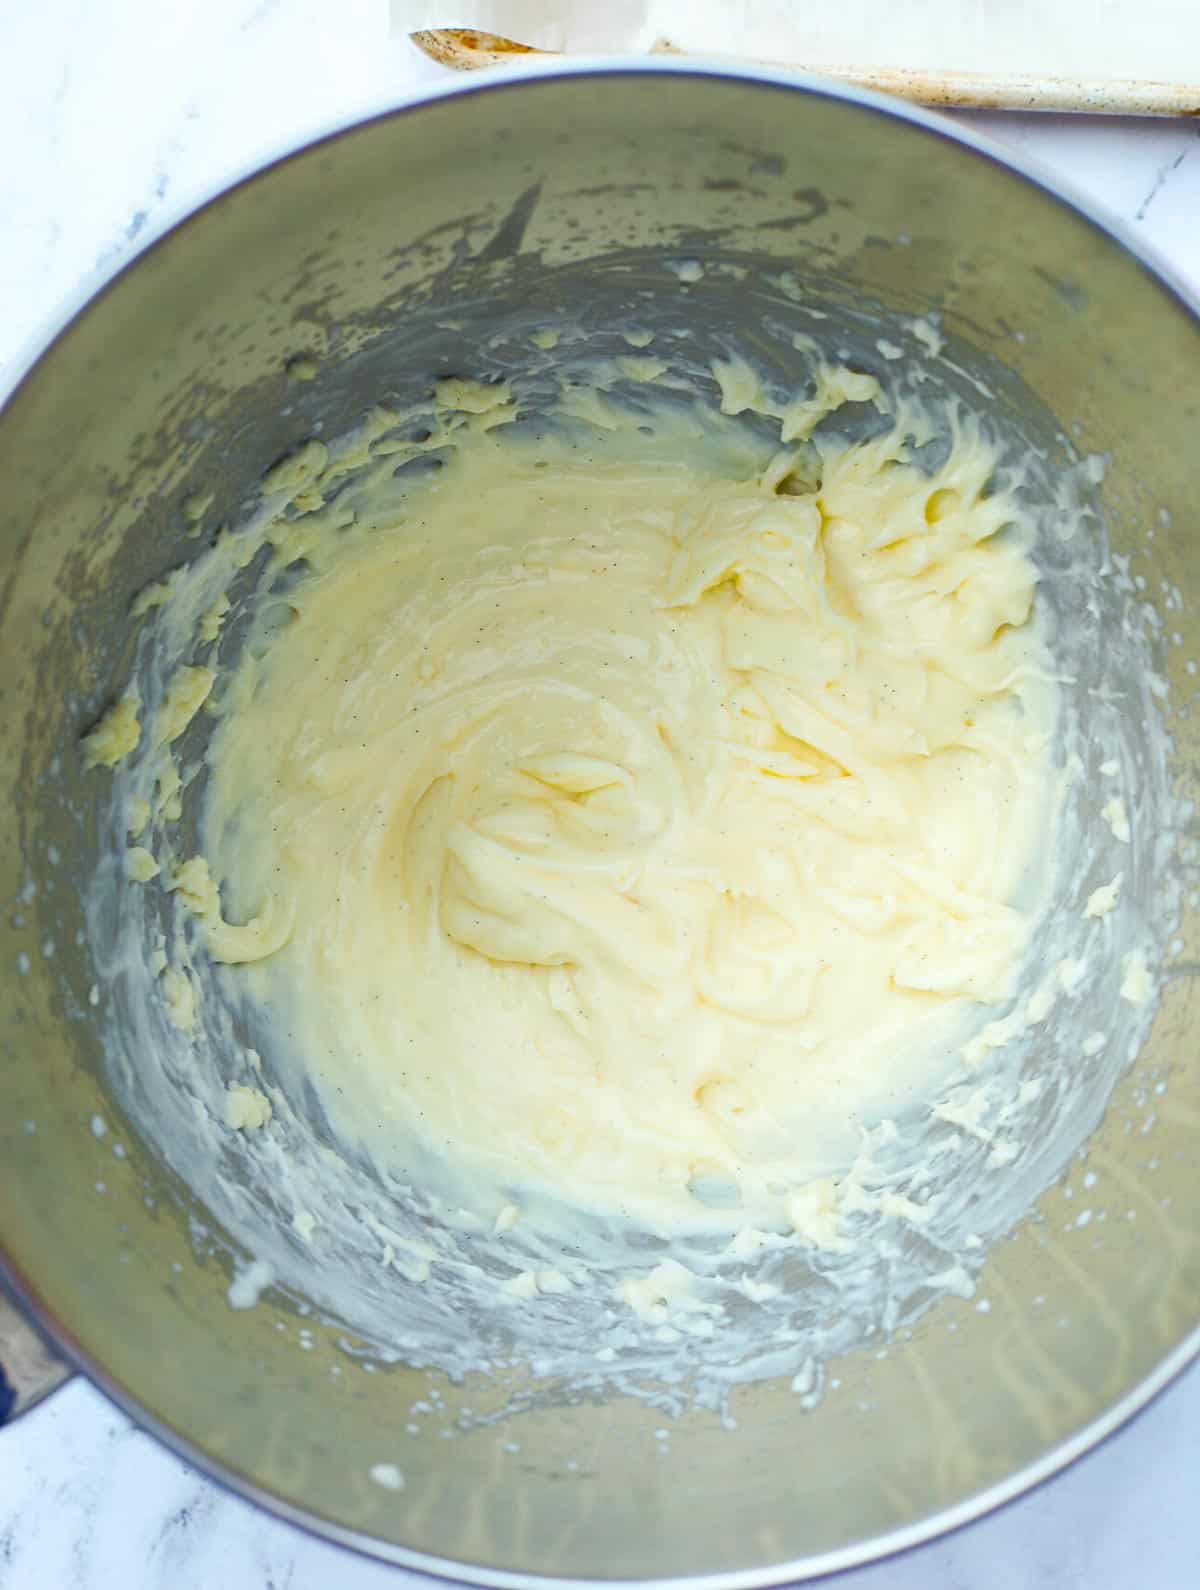 pastry cream filling whipped with whipped cream